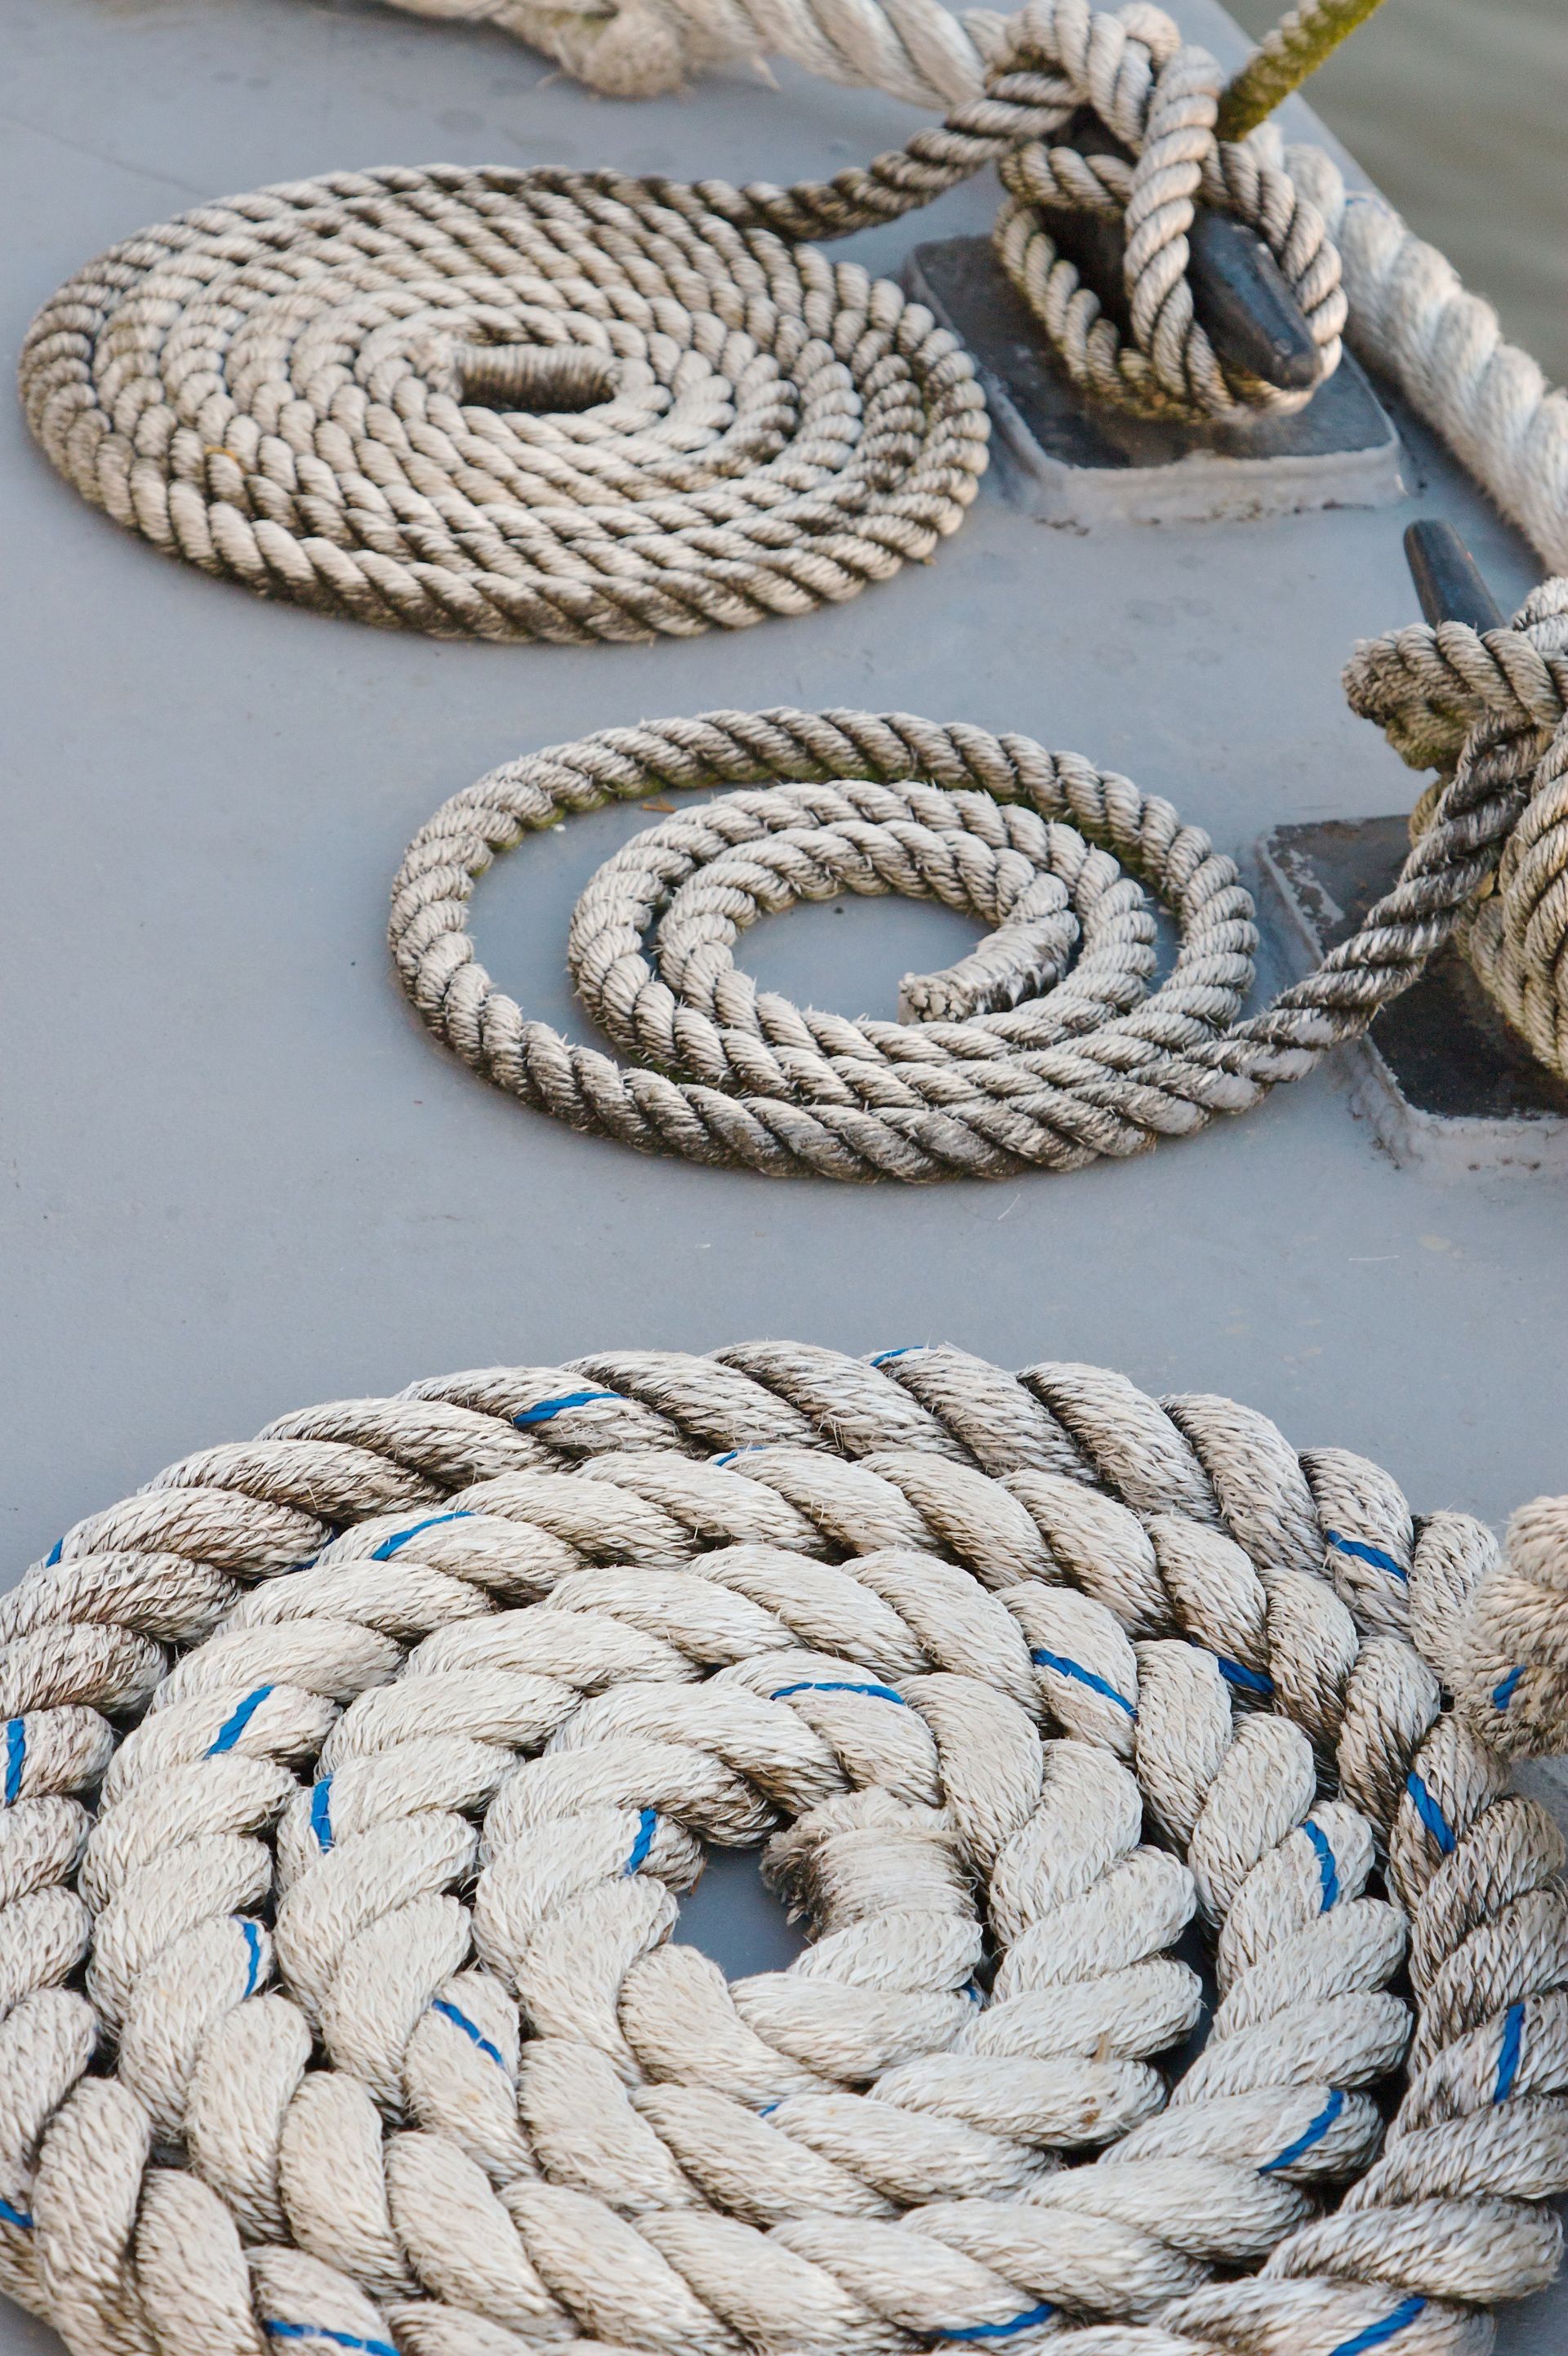 Three large white ropes coiled into tidy circles.